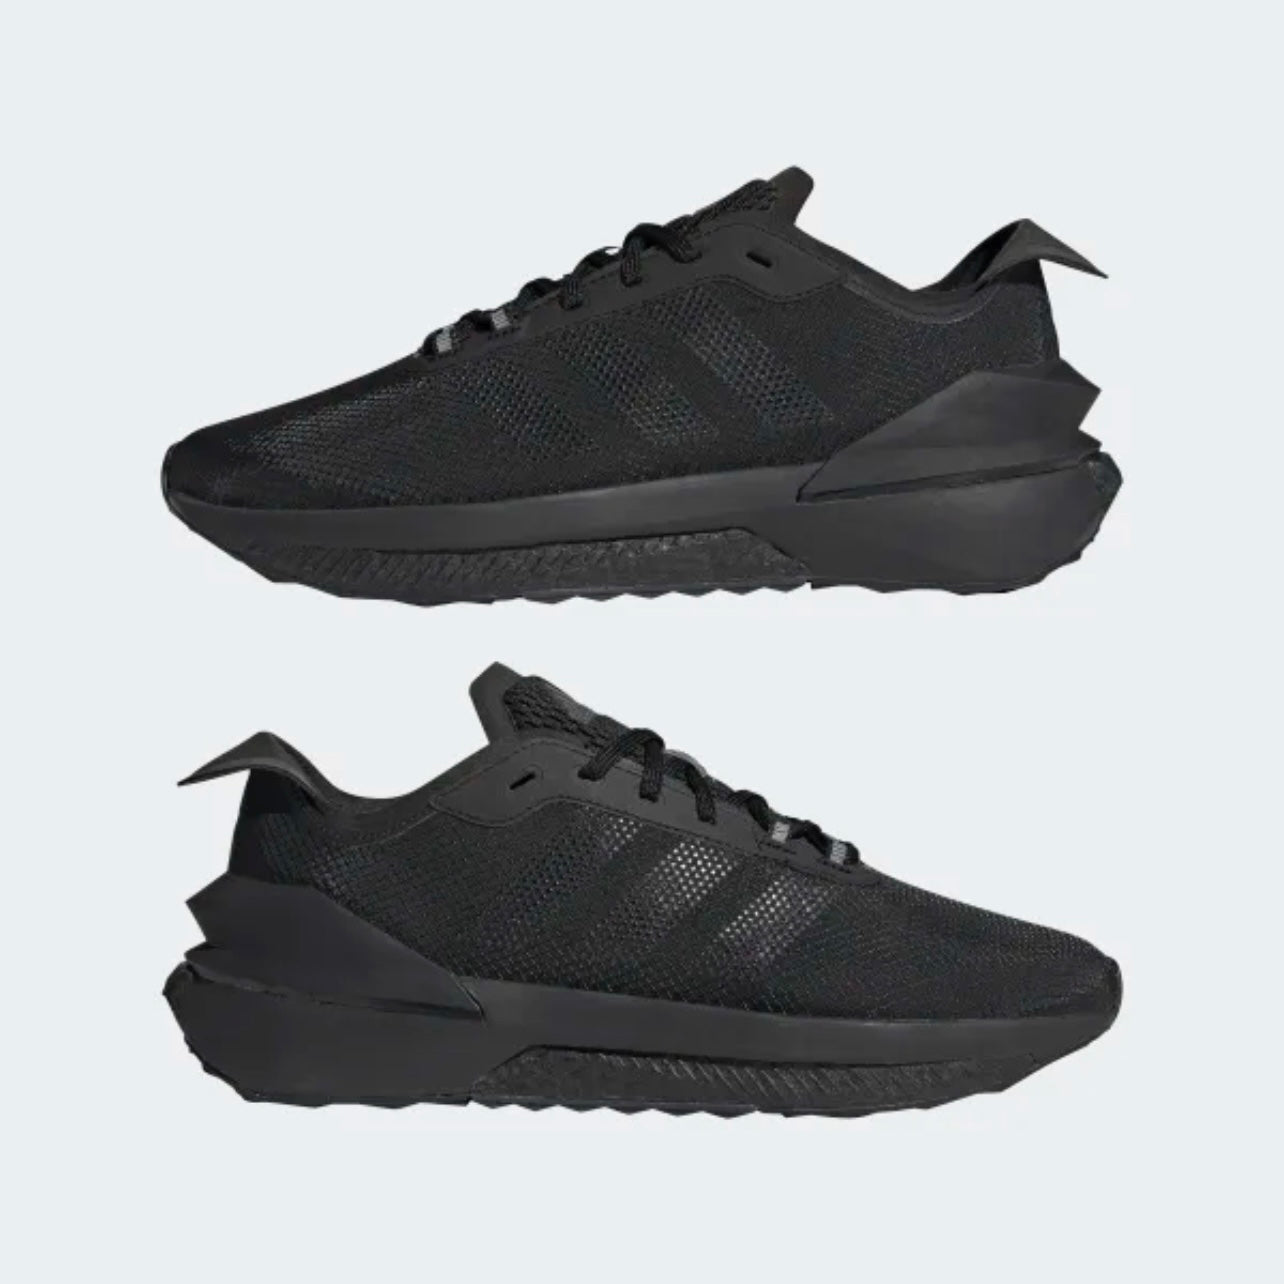 Adidas sneakers for men (HP5982)in black and black